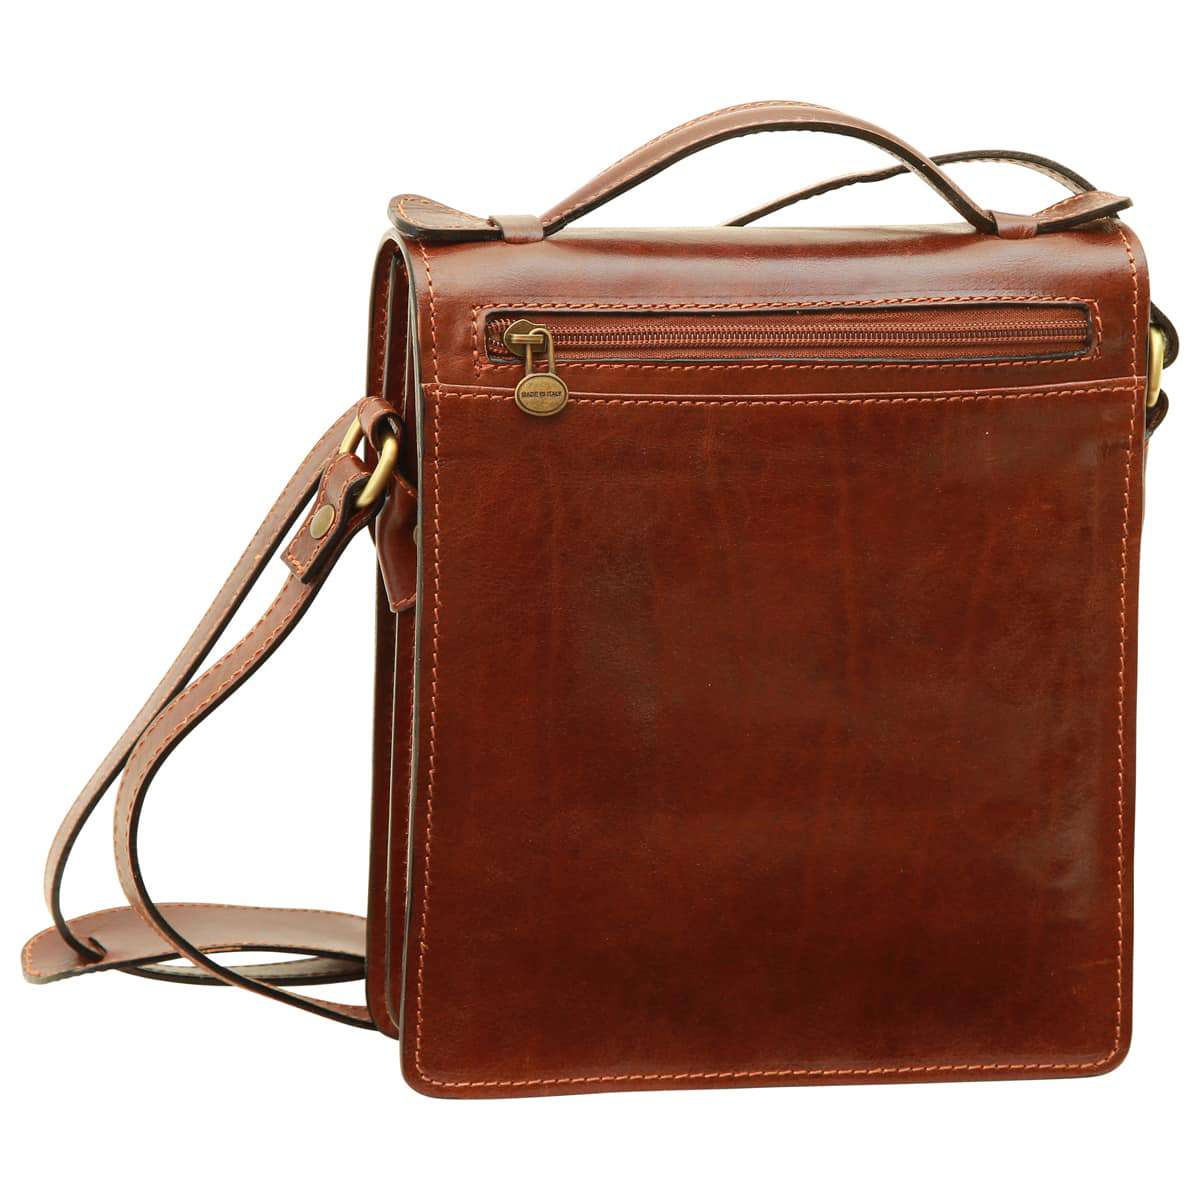 Classica II Leather Satchel - Brown | 079605MA US | Old Angler Firenze